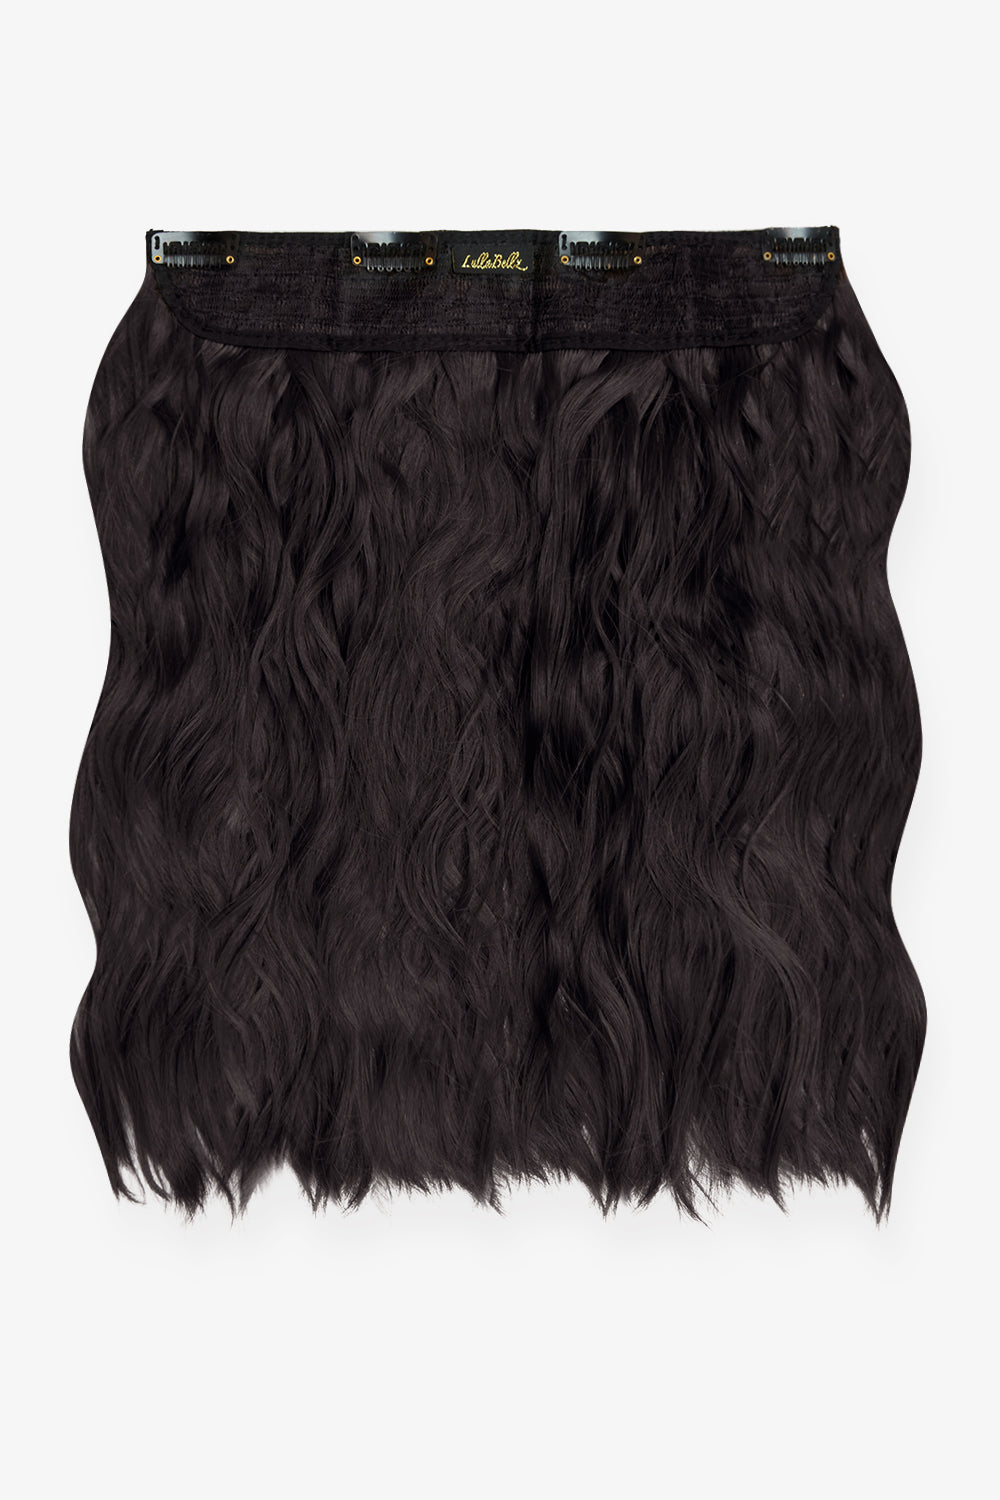 Thick 14" 1 Piece Textured Wave Clip-in Hair Extensions - Raven